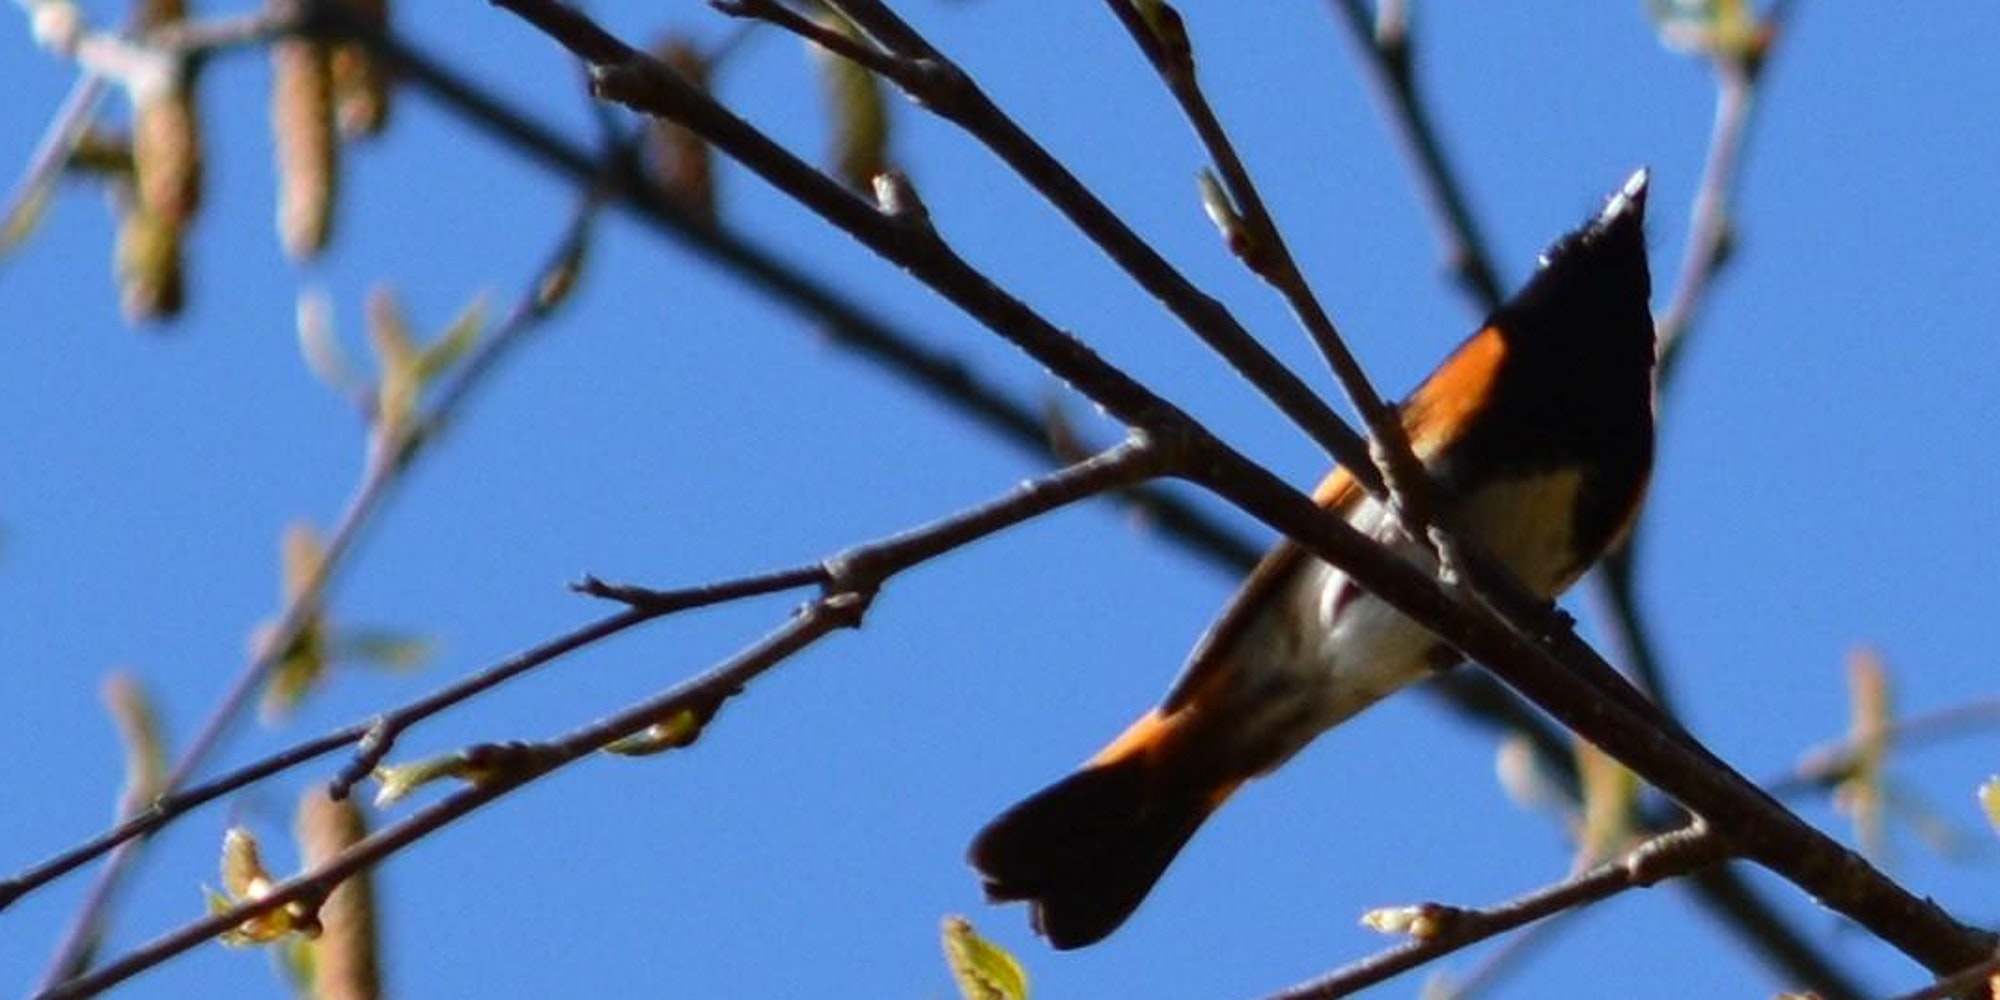 American Redstart male from below: an orange, white and black songbird with a white belly, seen from below while perched on small tree branches. Seen from below against a bright blue sky.